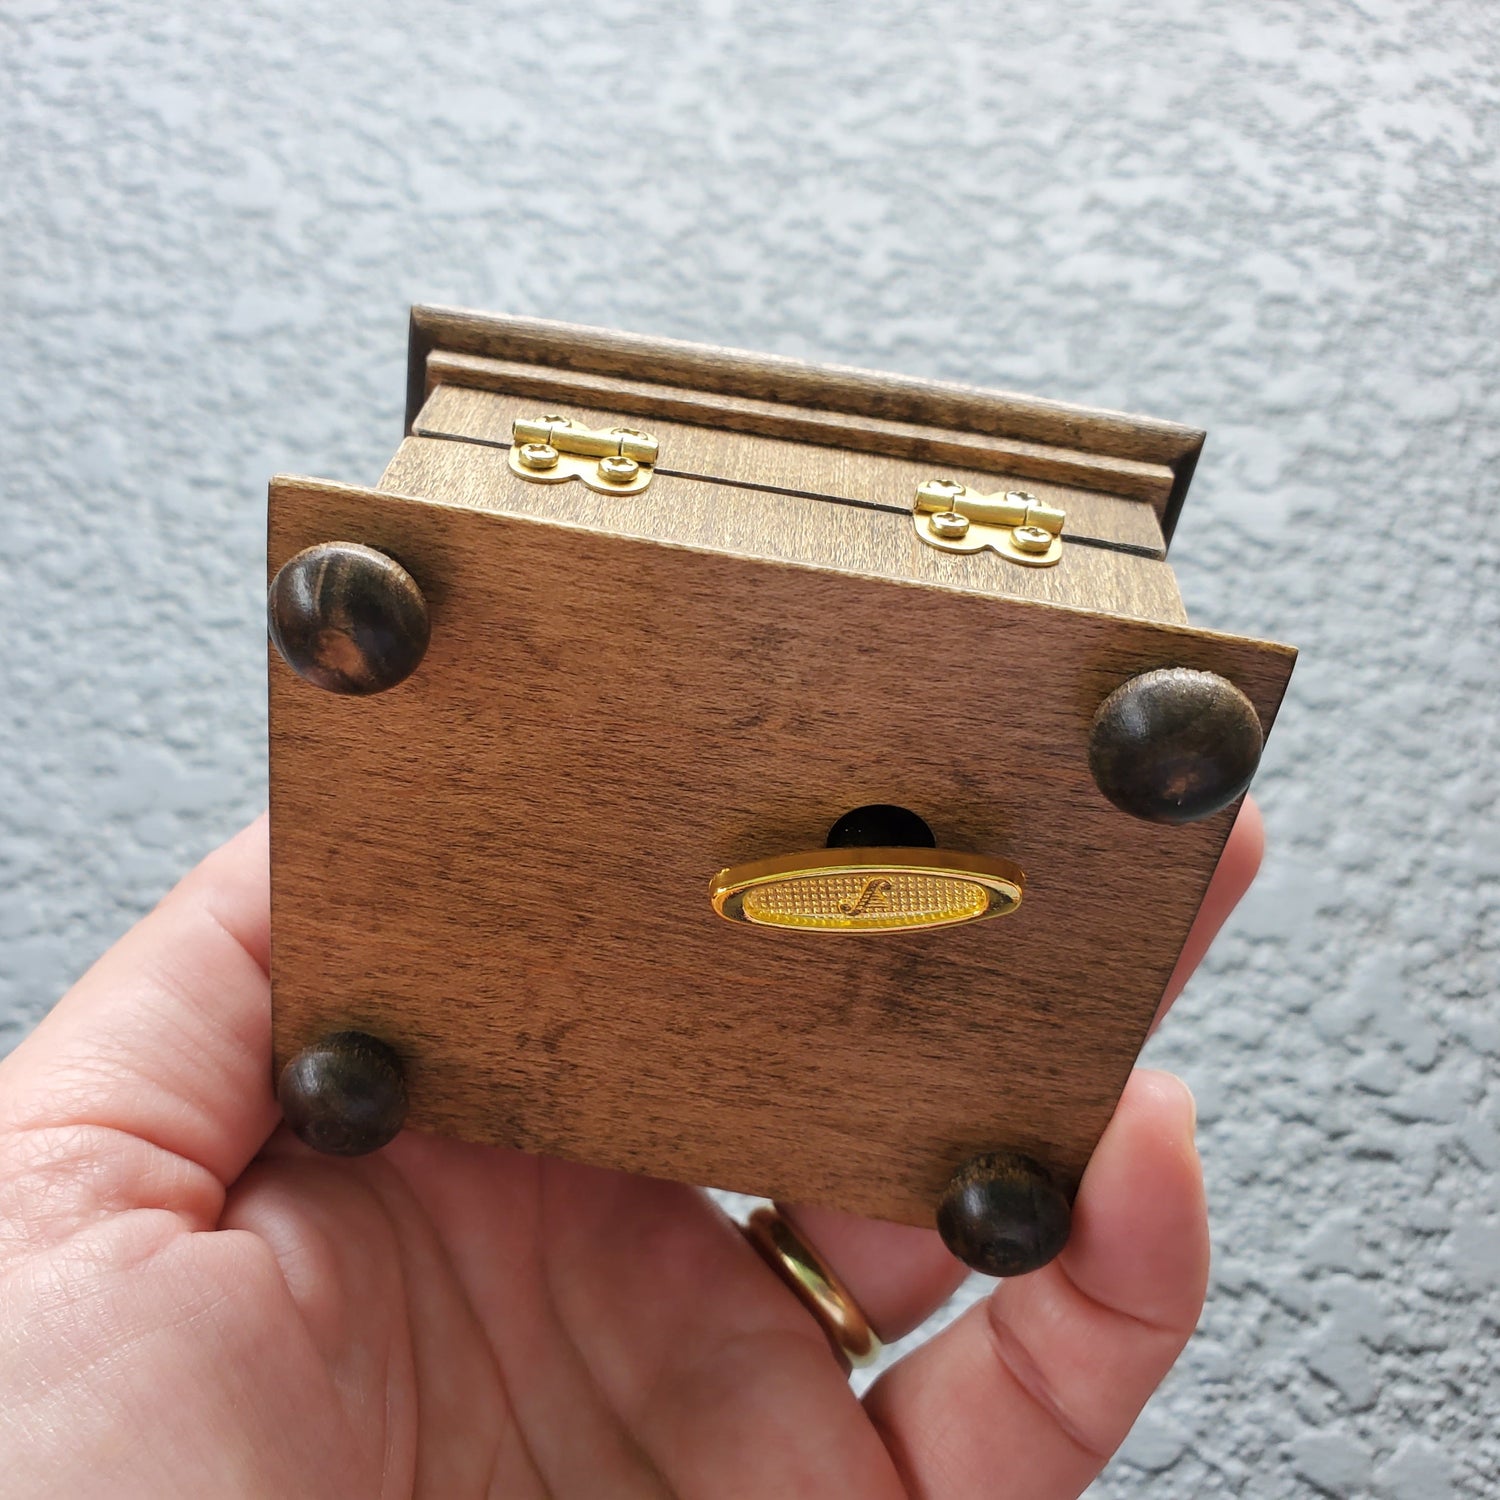 music box bottom side showing feet and wind up key